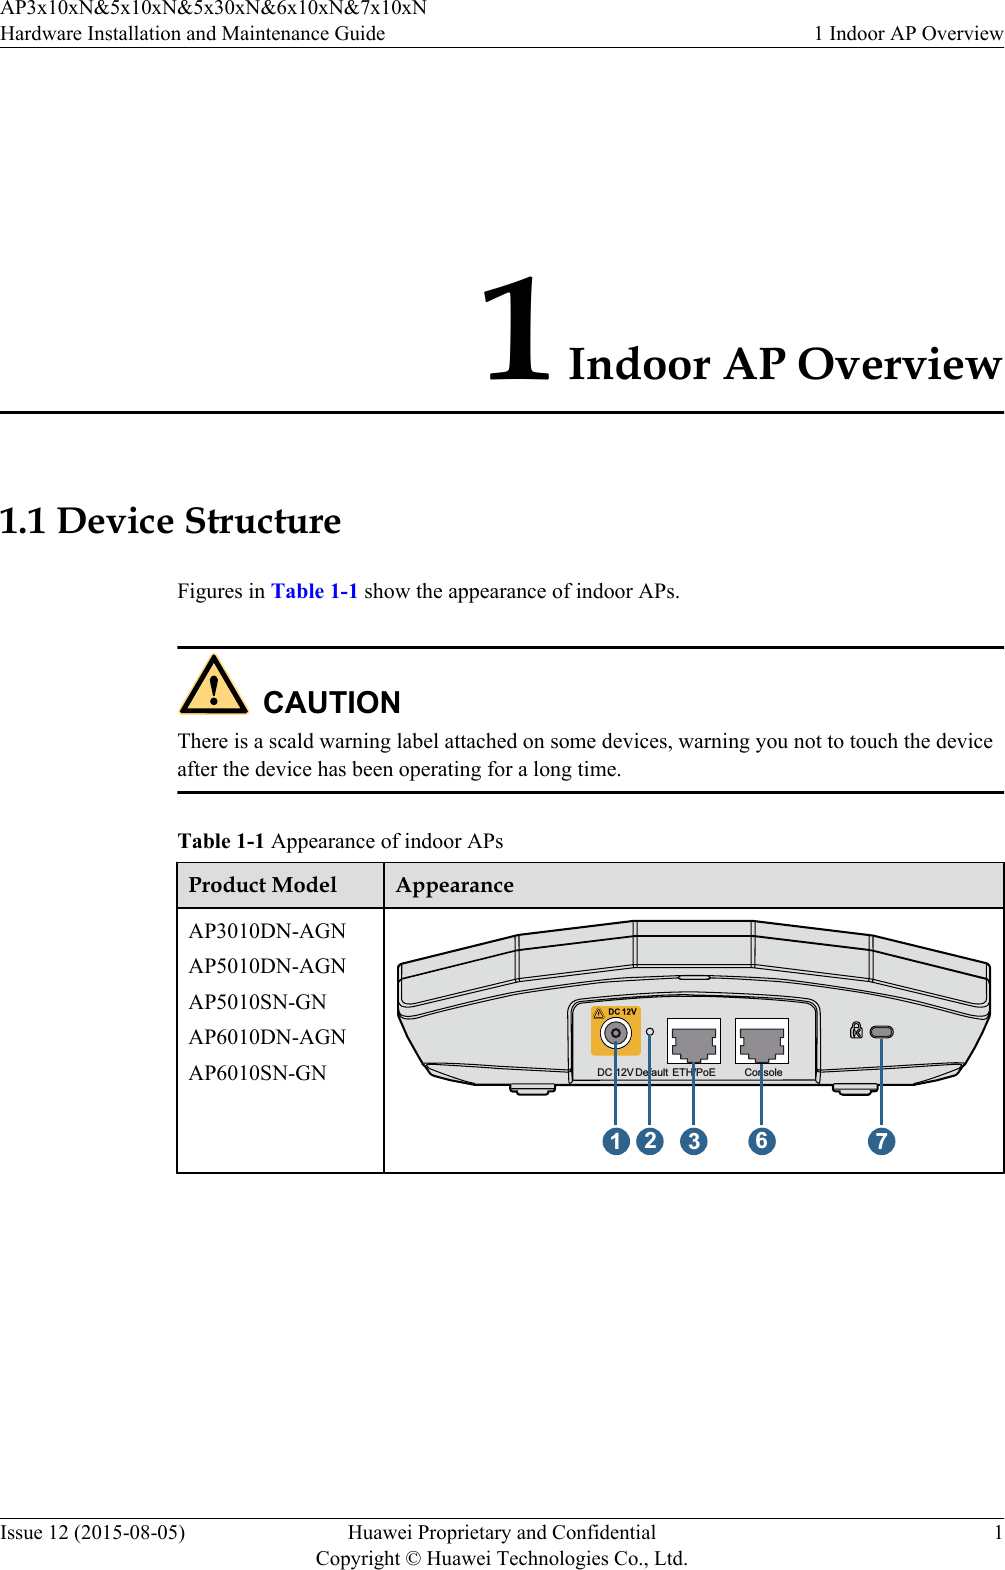 1 Indoor AP Overview1.1 Device StructureFigures in Table 1-1 show the appearance of indoor APs.CAUTIONThere is a scald warning label attached on some devices, warning you not to touch the deviceafter the device has been operating for a long time.Table 1-1 Appearance of indoor APsProduct Model AppearanceAP3010DN-AGNAP5010DN-AGNAP5010SN-GNAP6010DN-AGNAP6010SN-GN12367ConsoleETH/PoEDefaultDC 12VAP3x10xN&amp;5x10xN&amp;5x30xN&amp;6x10xN&amp;7x10xNHardware Installation and Maintenance Guide 1 Indoor AP OverviewIssue 12 (2015-08-05) Huawei Proprietary and ConfidentialCopyright © Huawei Technologies Co., Ltd.1